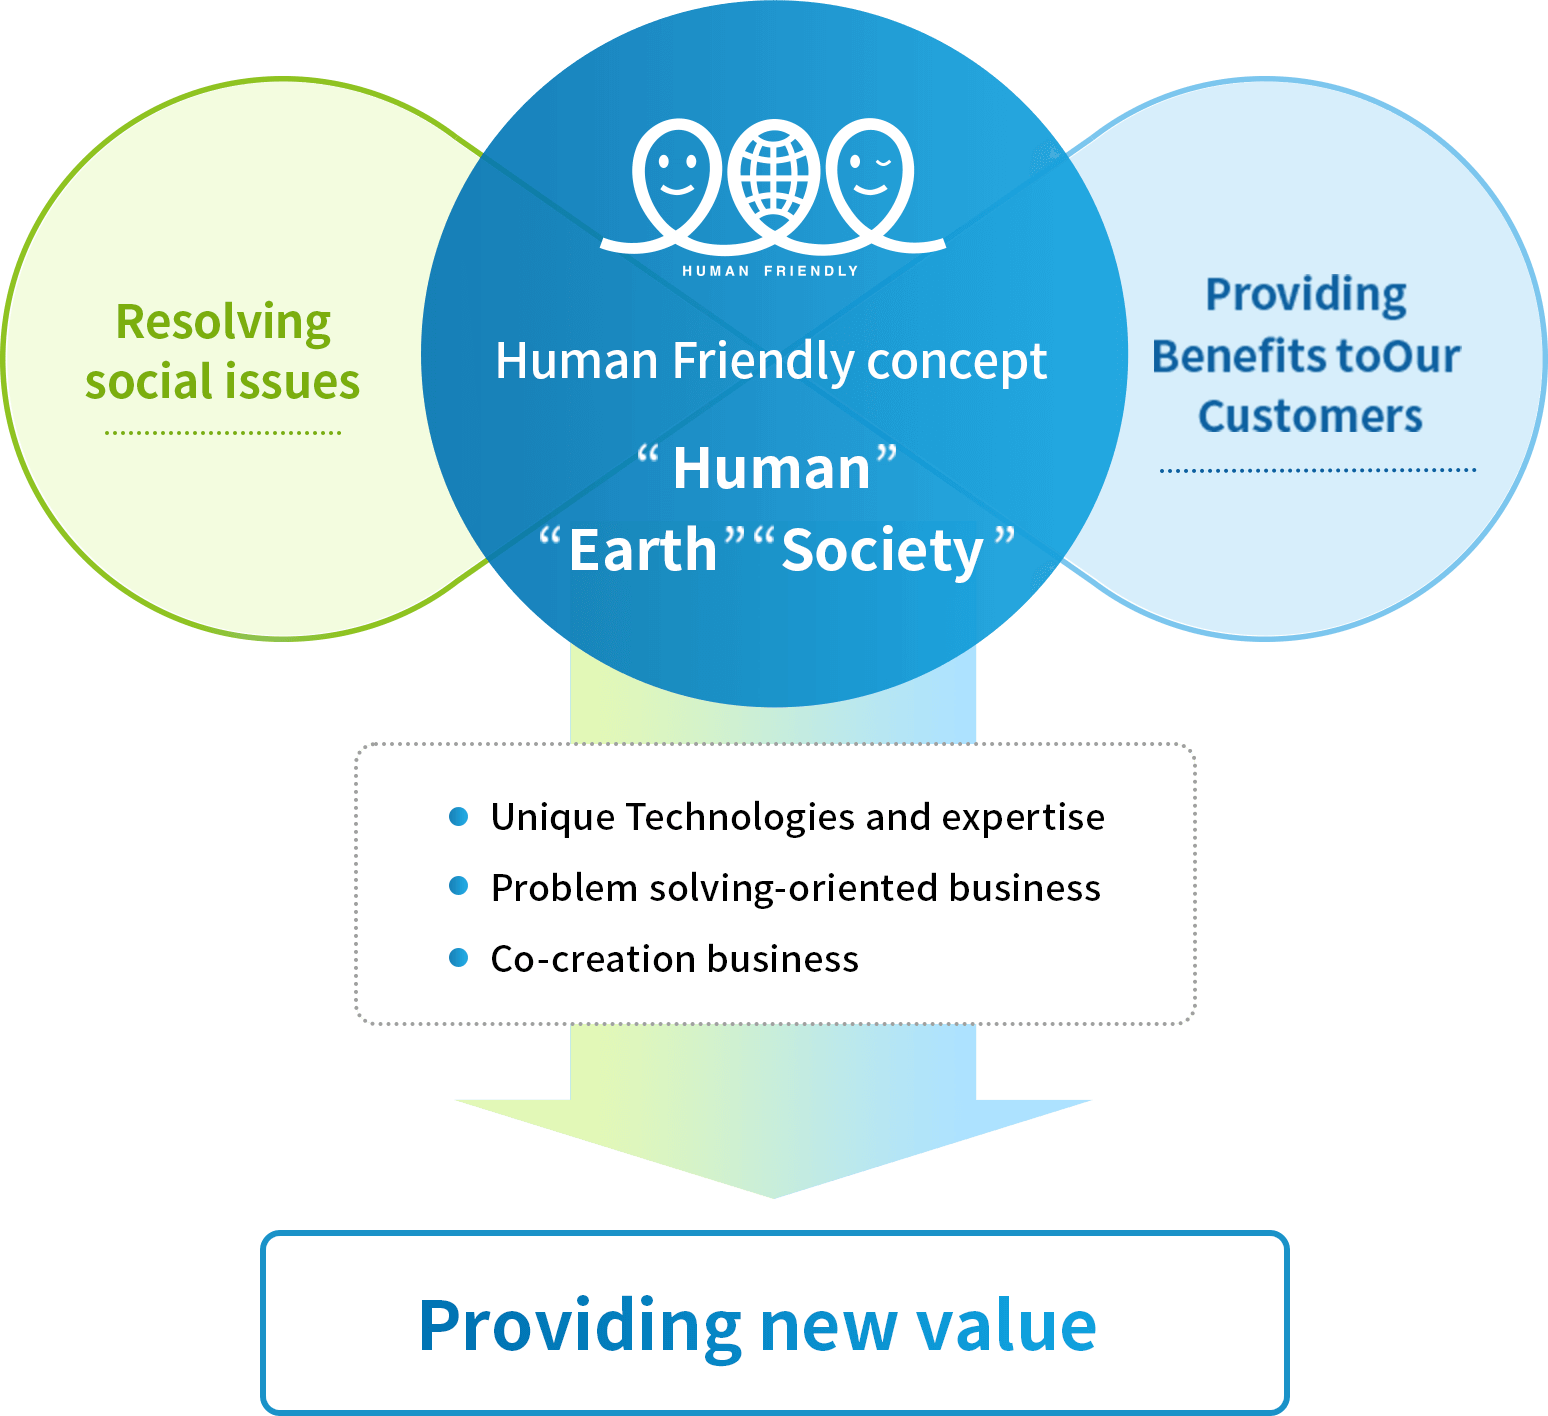 Human Friendly concept“Human”“Earth”“Society”. Resolving social issues. Providing Benefits toOur Customers. Unique Technologies and expertise. Problem solving-oriented business. Co-creation business. Providing new value.